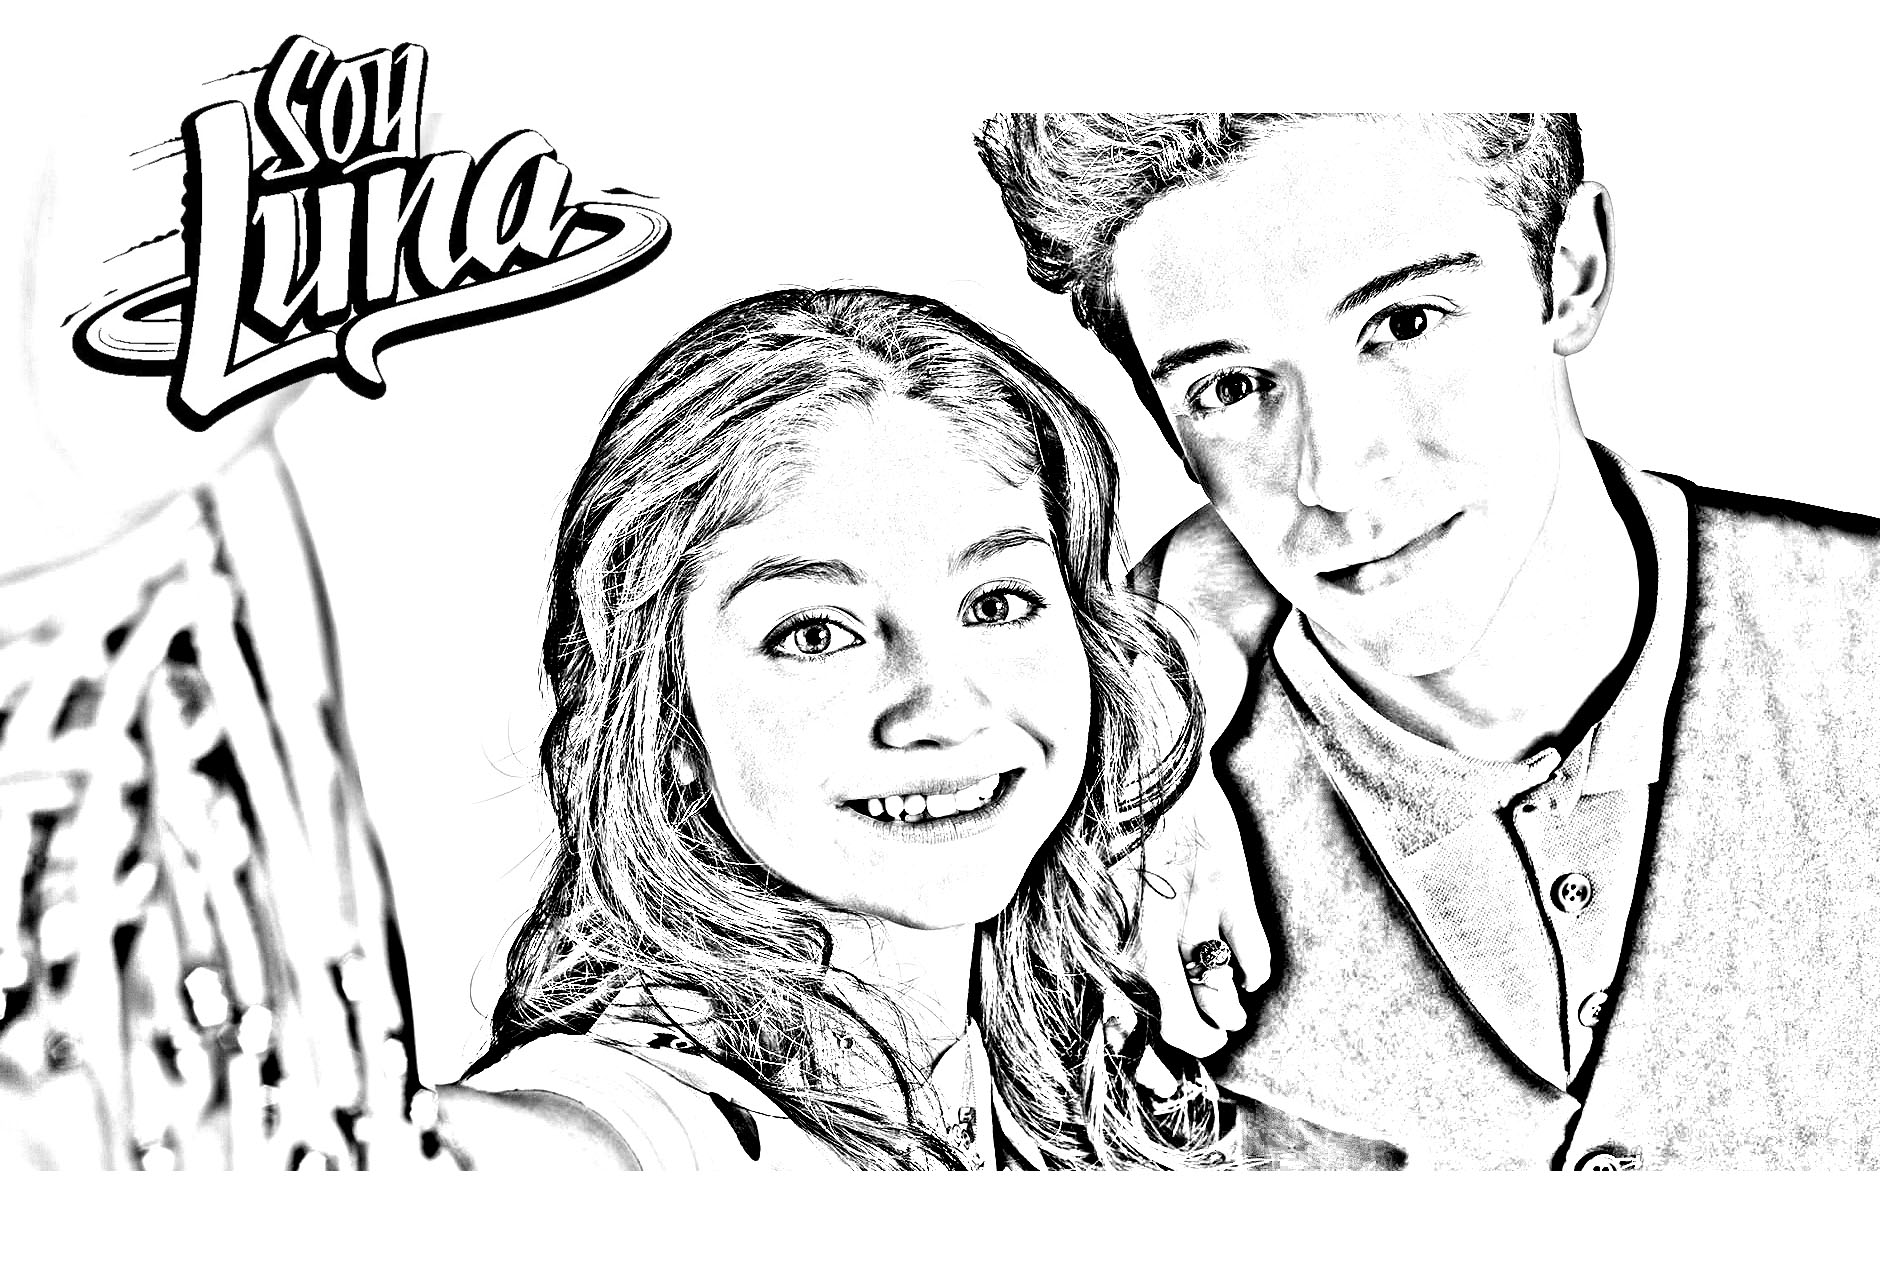 Color this beautiful coloring page of Soy Luna with your favorite colors